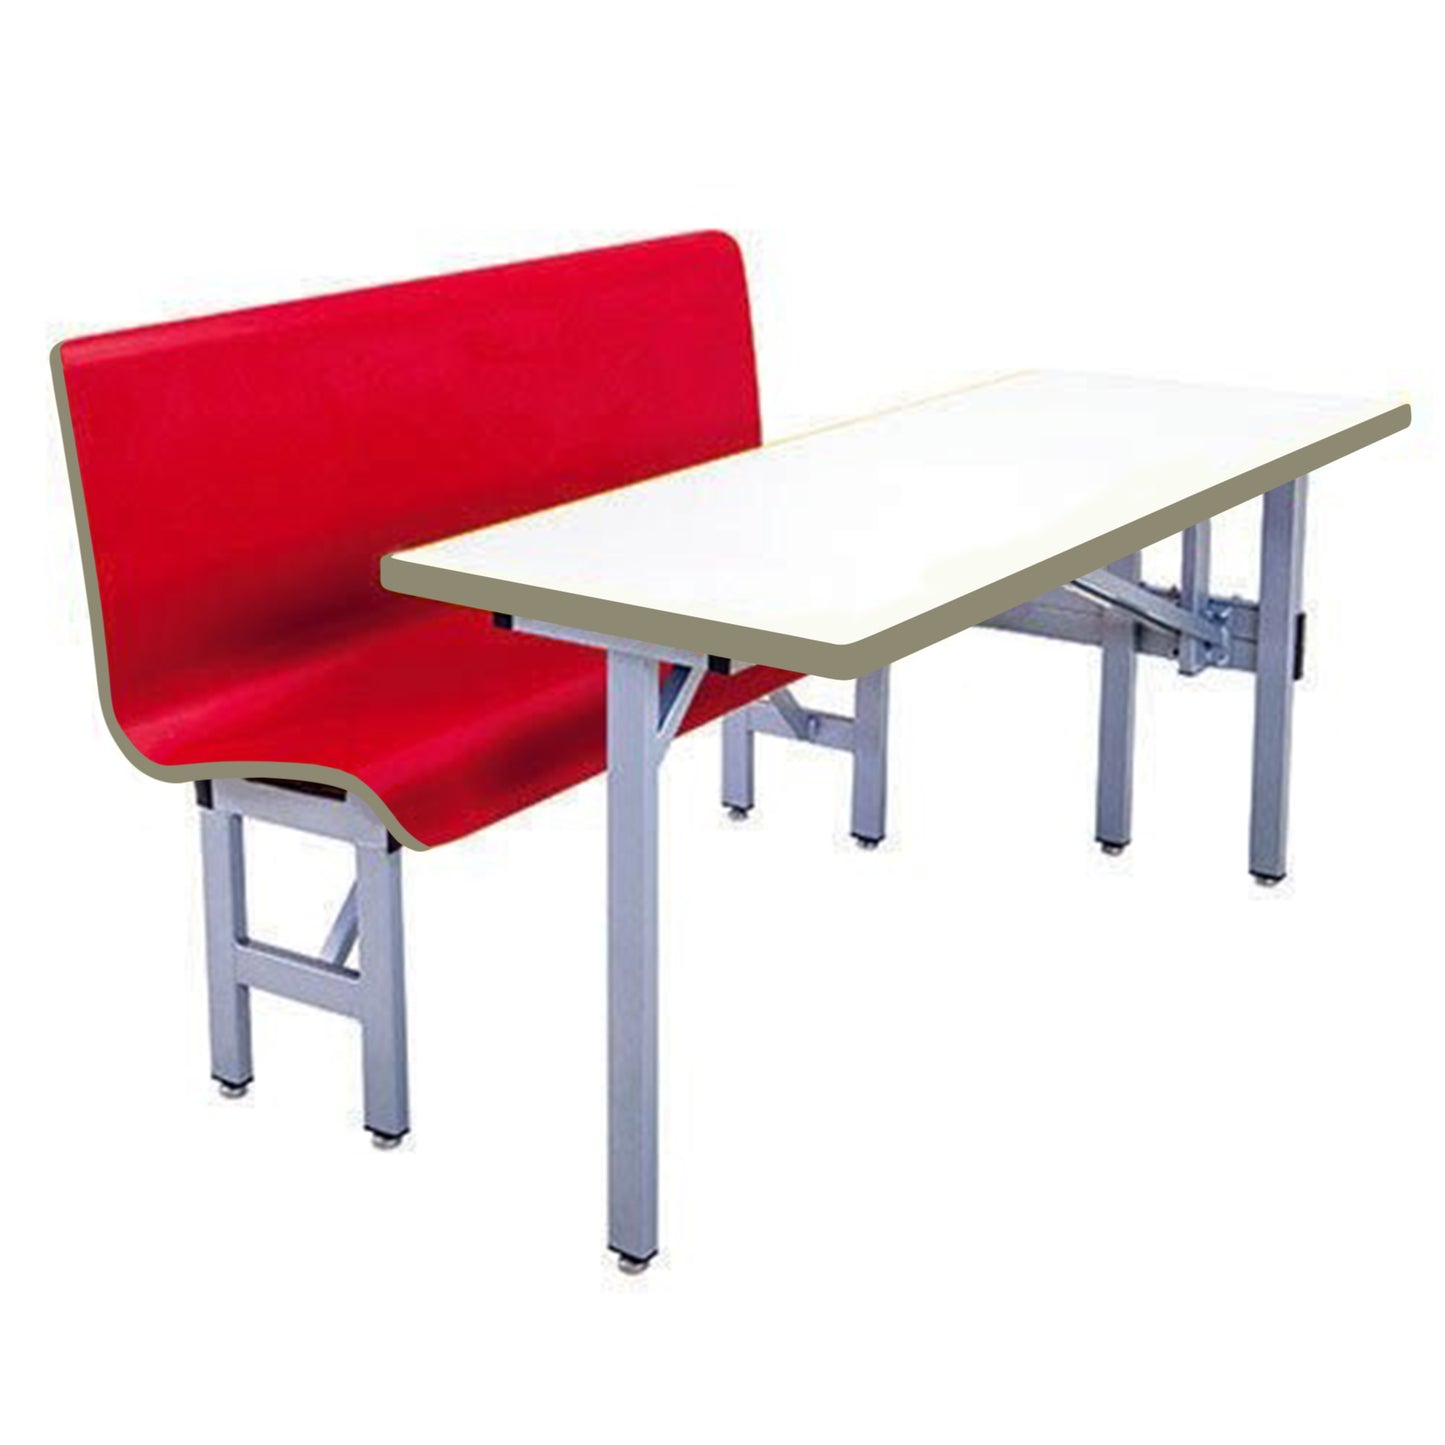 AmTab Booth Seating with Table - Half Package - 48"W x 54"L x 38"H  (AMT-MWHBSP304)